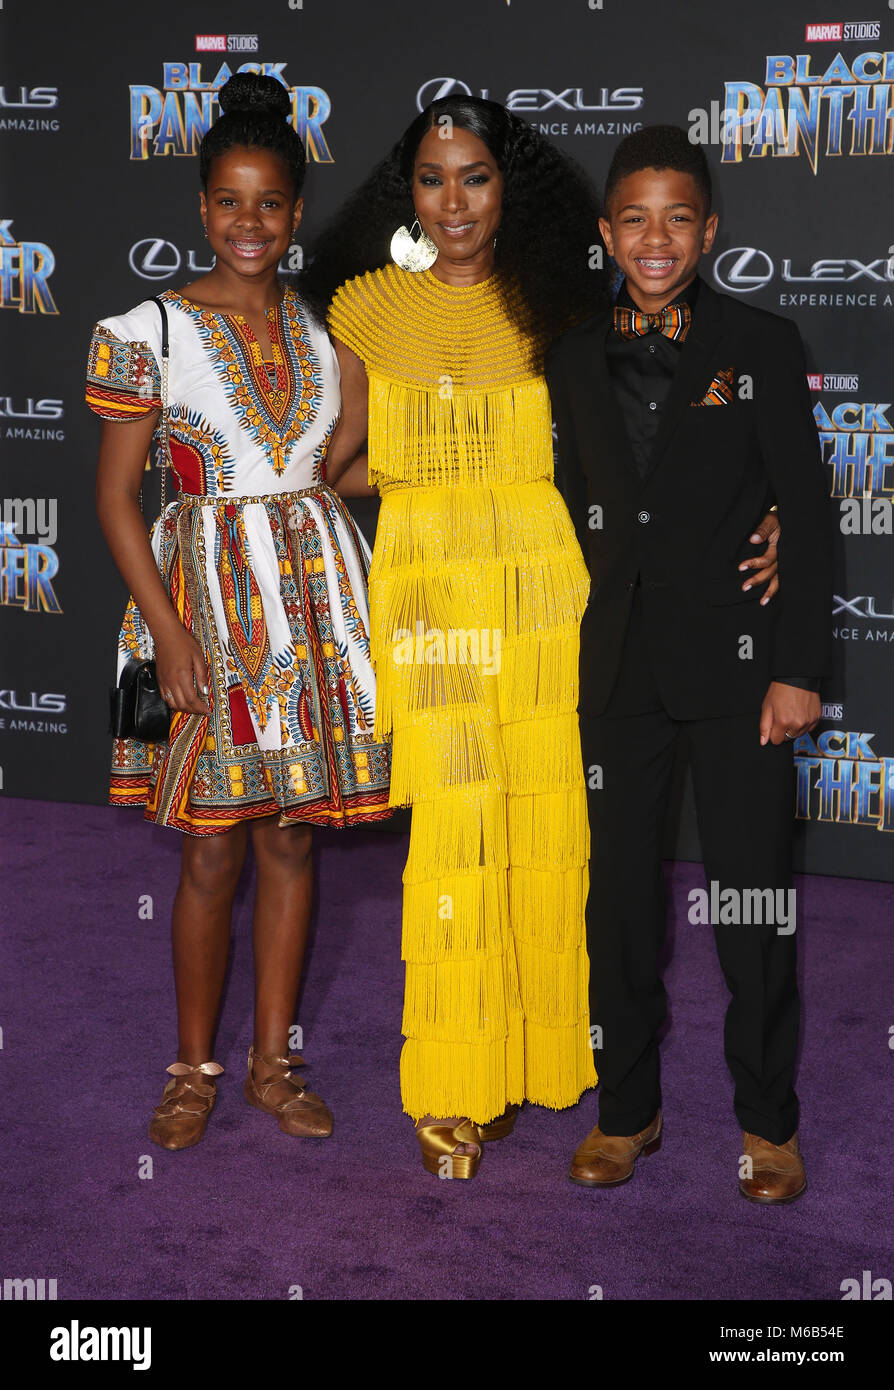 World Premiere of Marvel Studios Black Panther  Featuring: Angela Bassett, Bronwyn Vance, Slater Vance Where: Hollywood, California, United States When: 30 Jan 2018 Credit: FayesVision/WENN.com Stock Photo